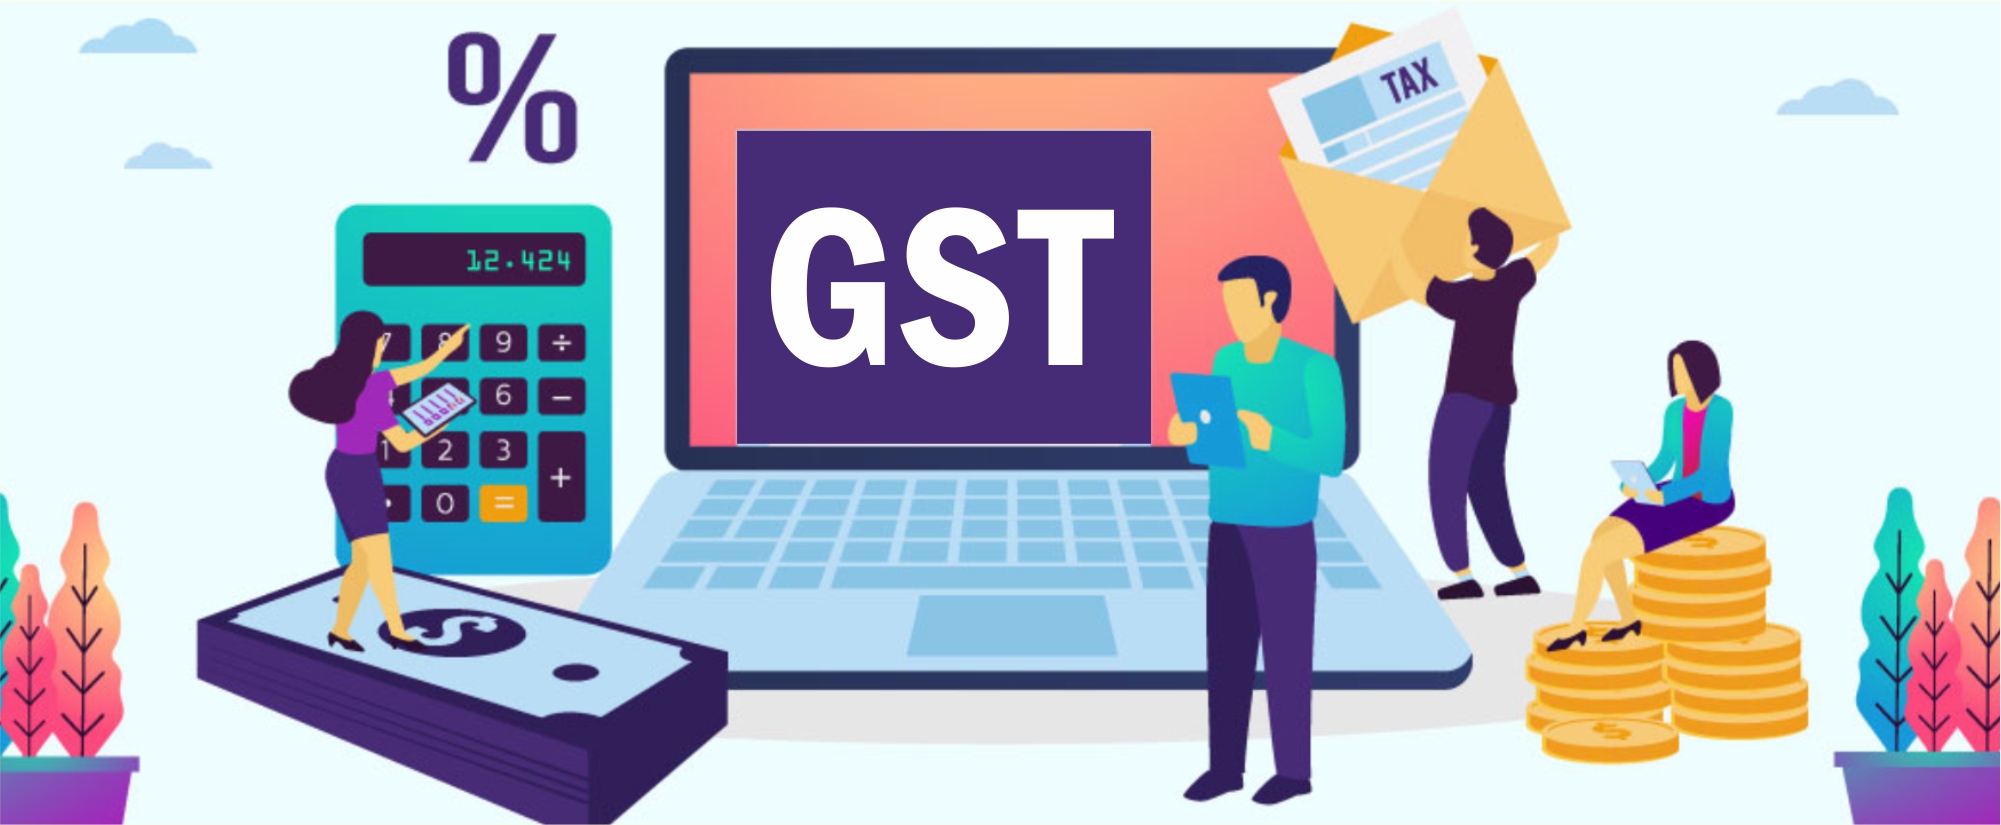 How to Set Up a GST Suvidha Kendra:  Eligibility and Registration Procedure